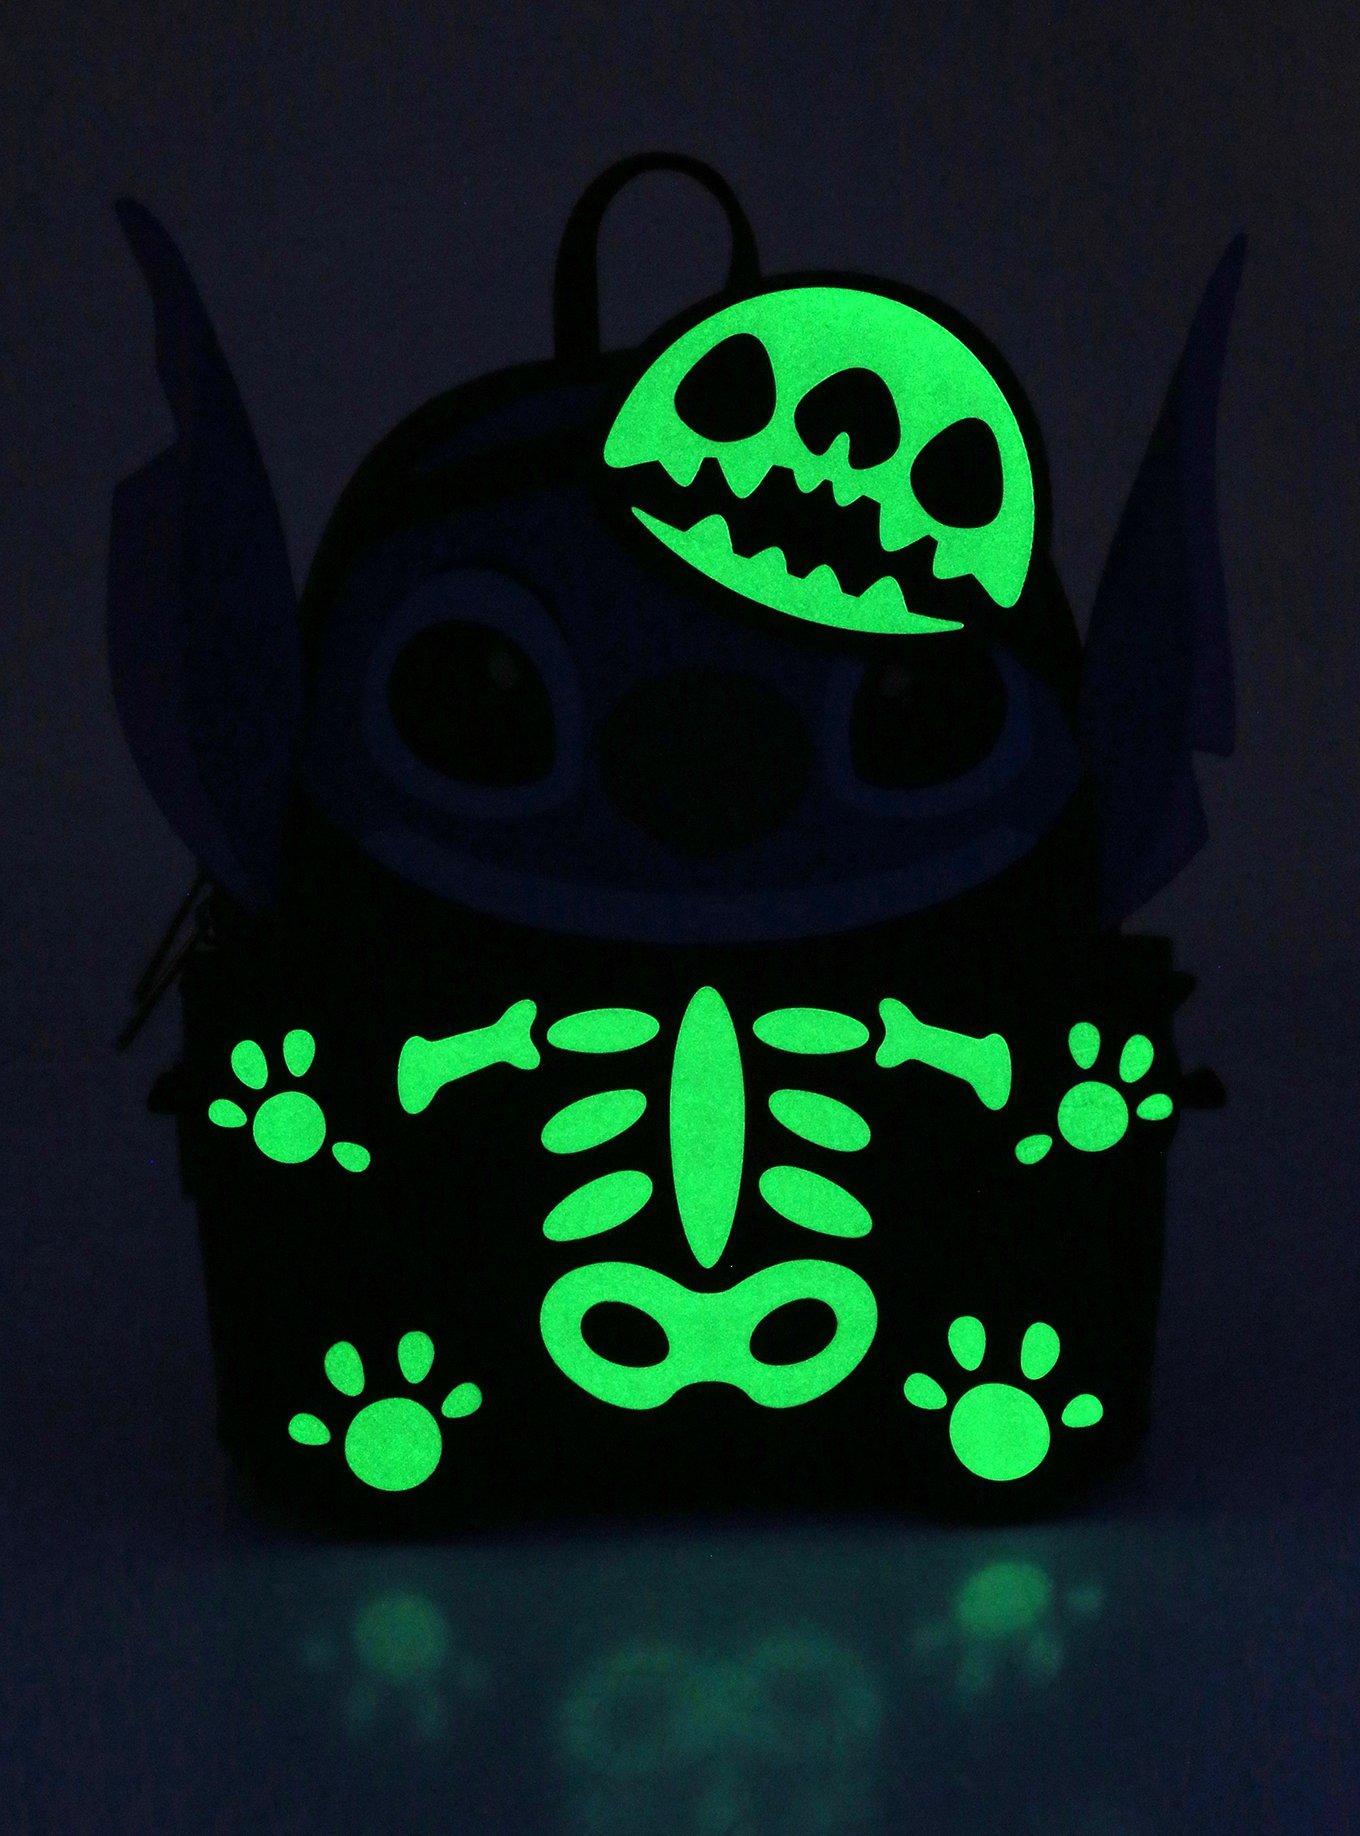 Loungefly Stitch Skeleton Glow in the Dark Backpack SDCC 2022 Exclusive  (NWT)